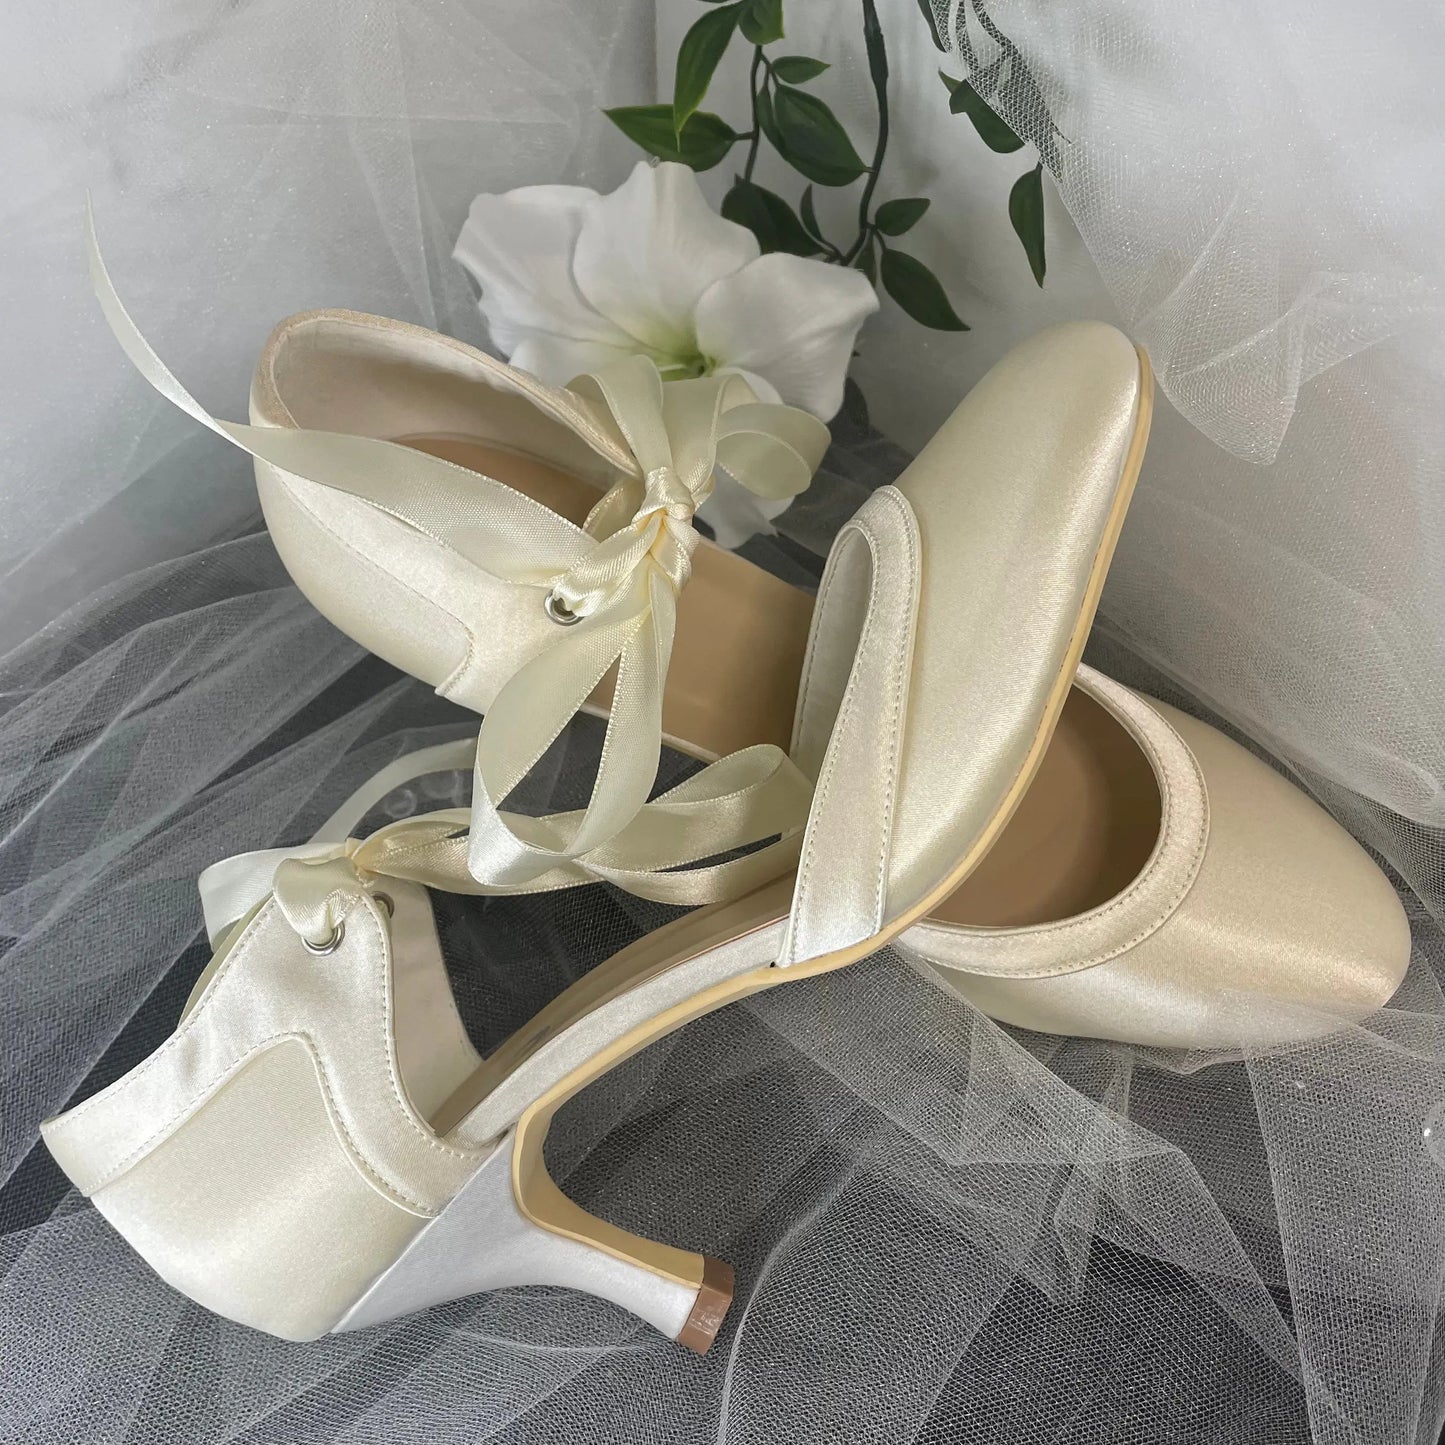 Ellie Bridal Shoe Pair Side and Front View Different Color: Side and front view of two Ellie Closed Toe Ribbon Ankle Strap Wedding Bridal Shoes showing the slight color difference due to display stock.